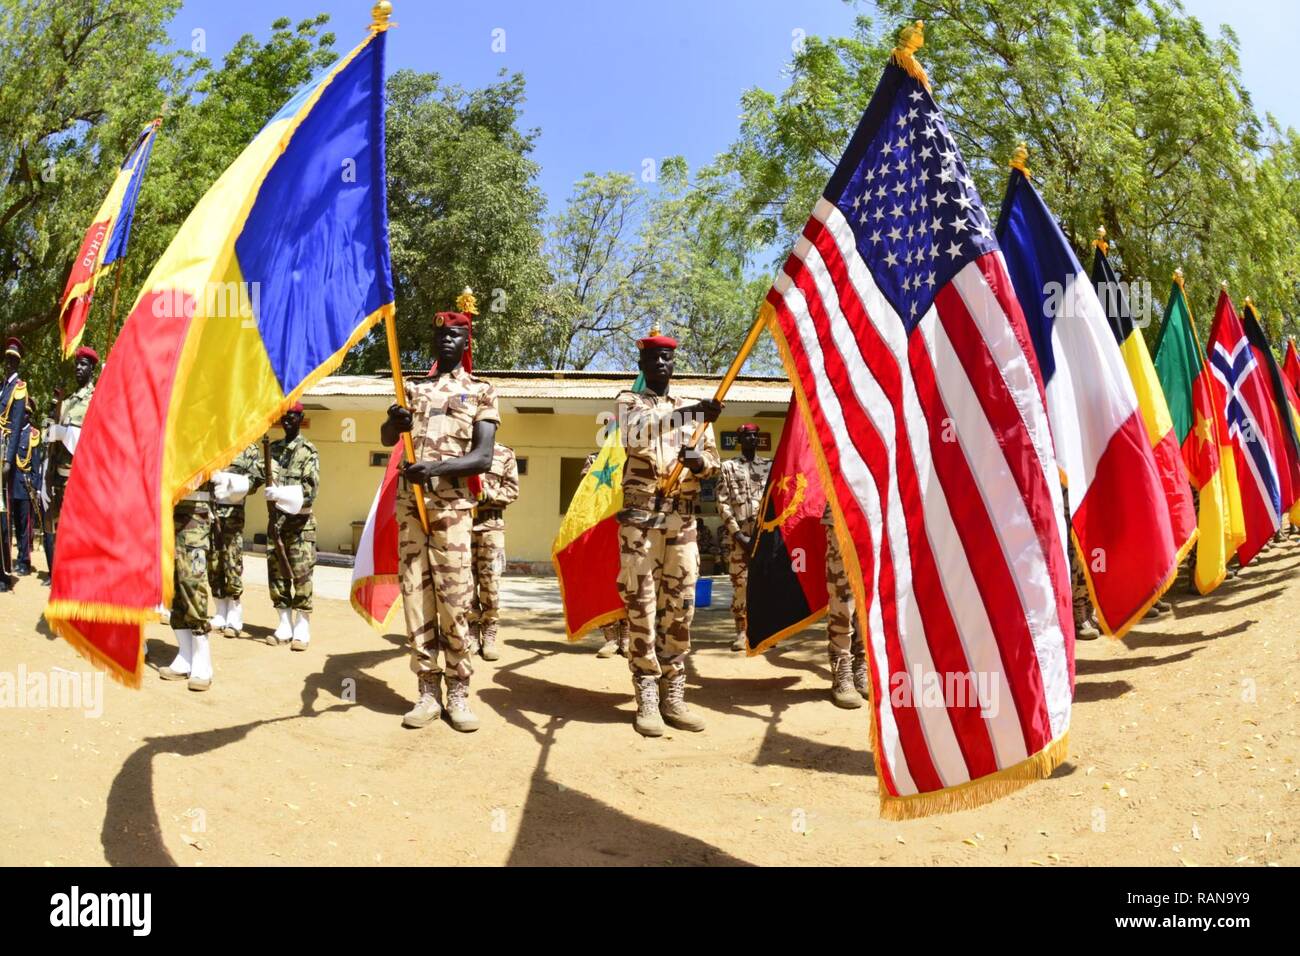 Soldiers of the Chadian Army raise the flags of partner nations participating in Flintlock 17 during the opening ceremony Feb. 27, 2017. Flintlock is an annual special operations exercise involving more than 20 nation forces that strengthens security institutions, promotes multilateral sharing of information, and develops interoperability among partner nations in North West Africa. Stock Photo